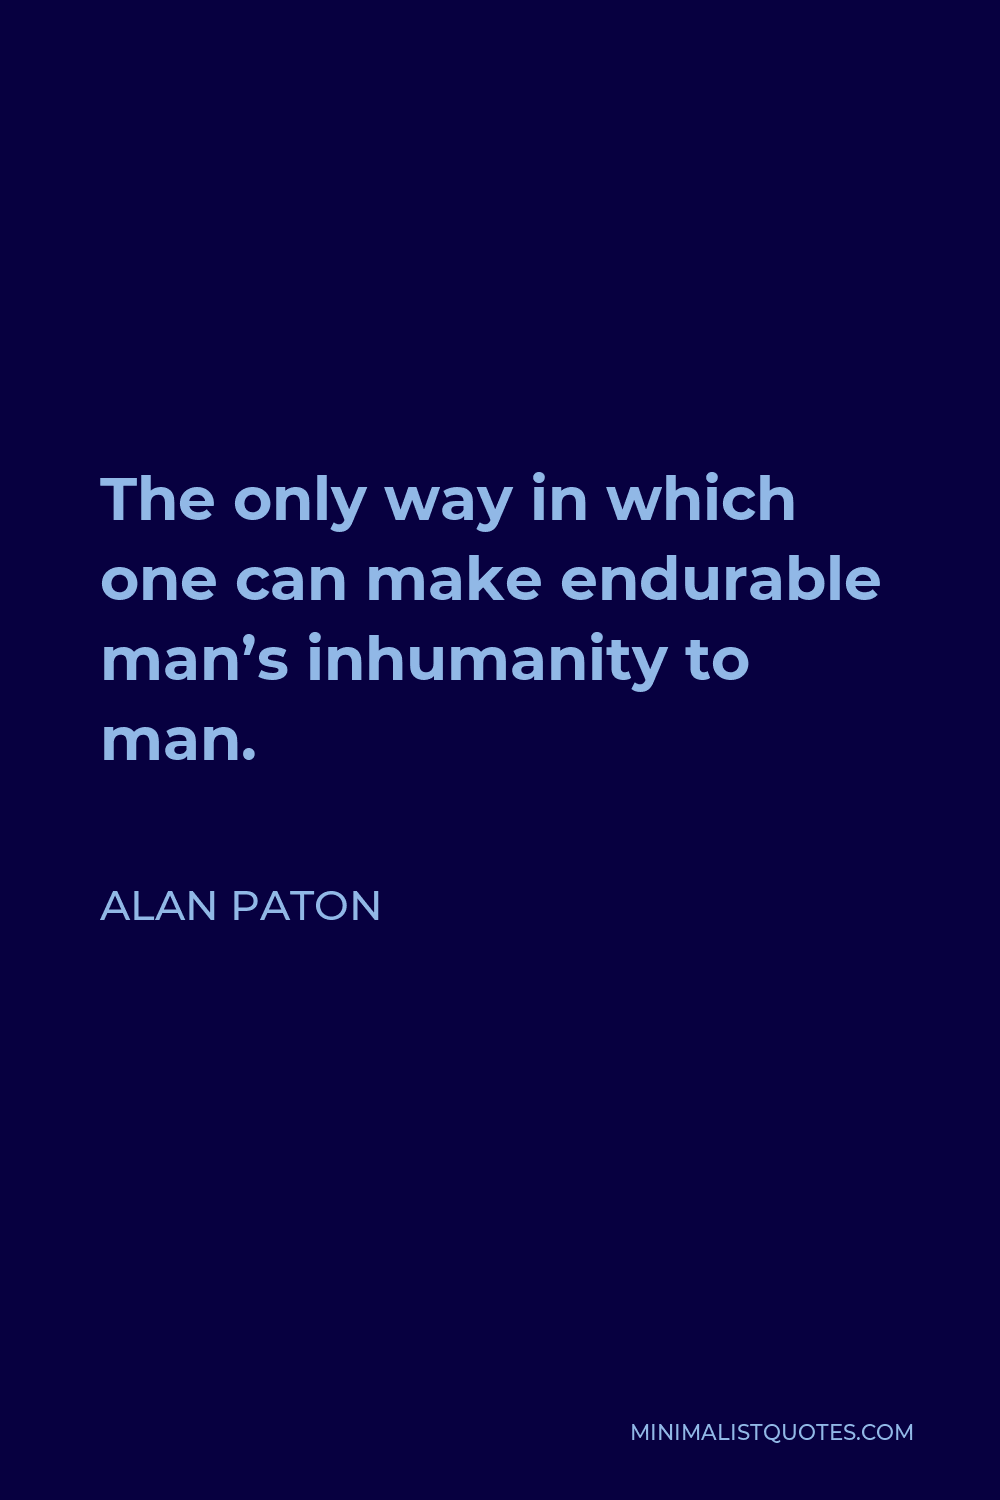 Alan Paton Quote - The only way in which one can make endurable man’s inhumanity to man.